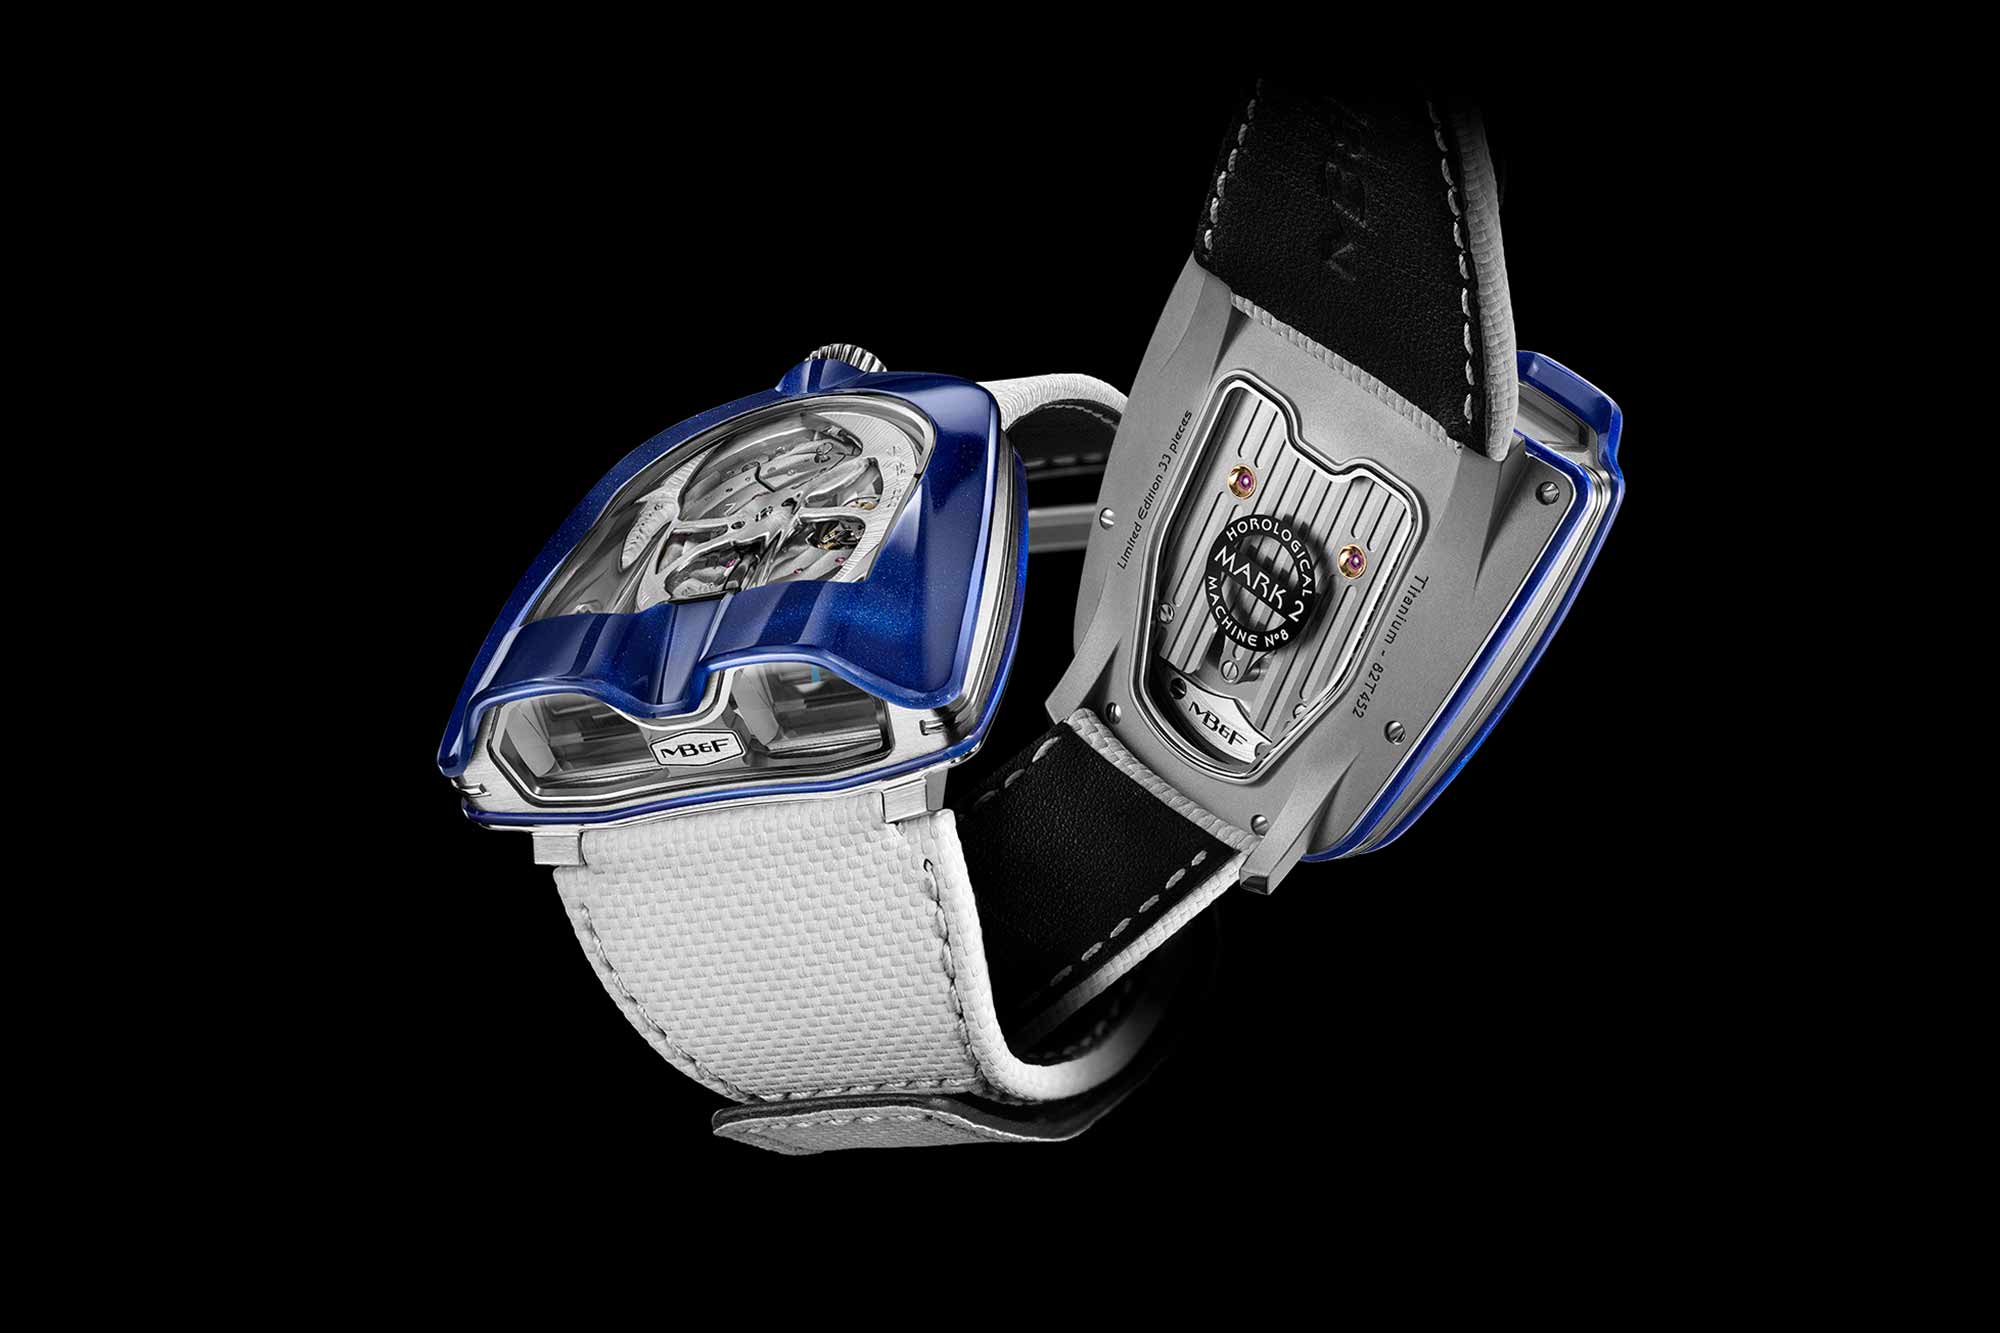 MB&F Updates the HM8 Mark II with a New Blue Limited Edition